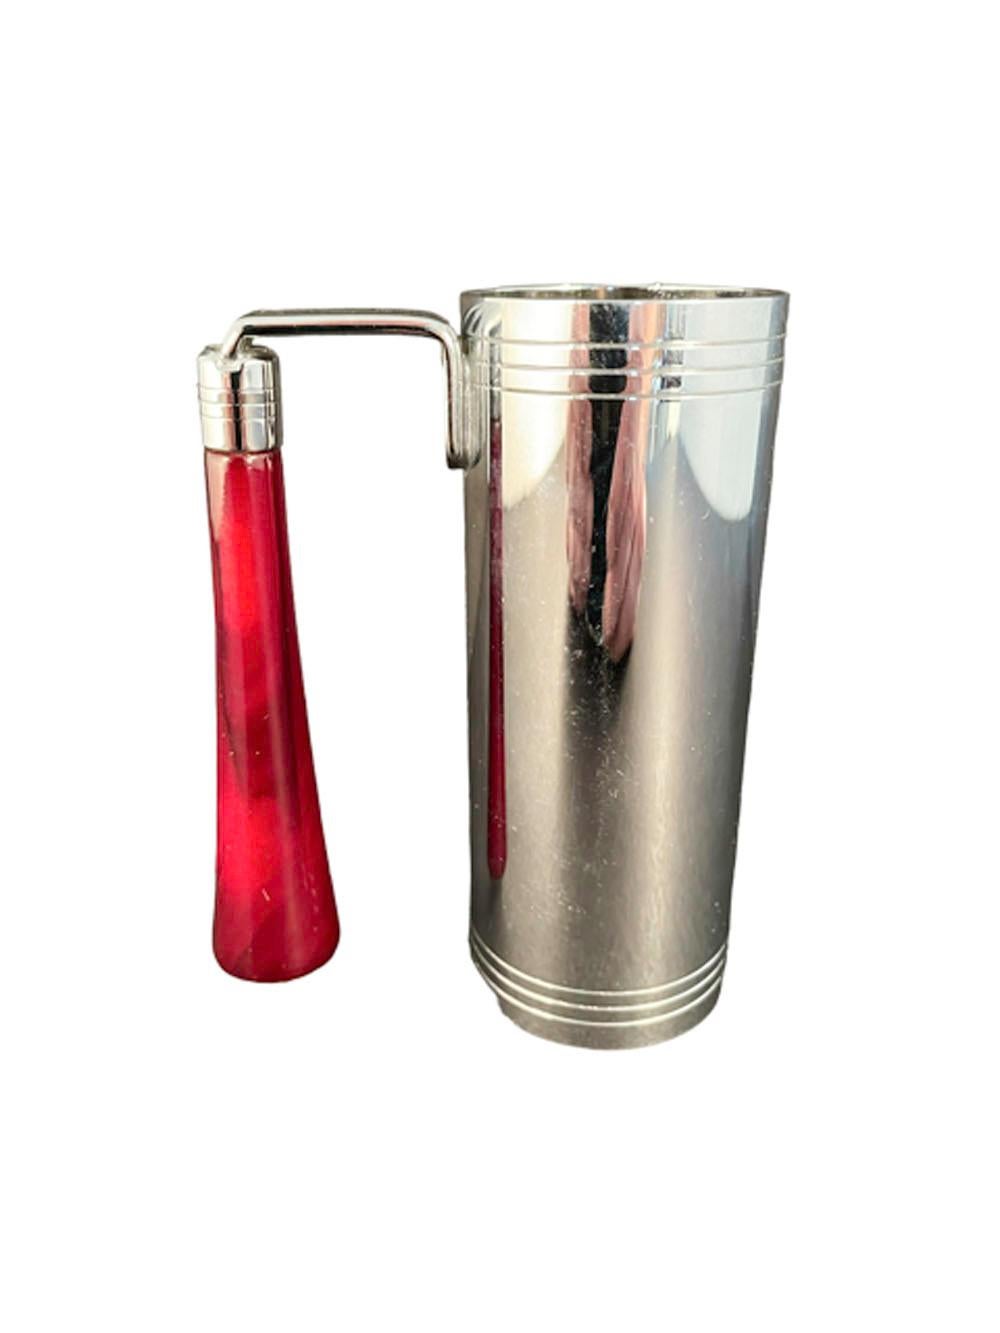 Vintage chrome jigger of cylindrical form designed as a traffic light with green, yellow and red 'lights' marked 'Safe', 'Caution' & 'Danger', attached to the rim is a vertical handle made of faux red tortoiseshell Bakelite.